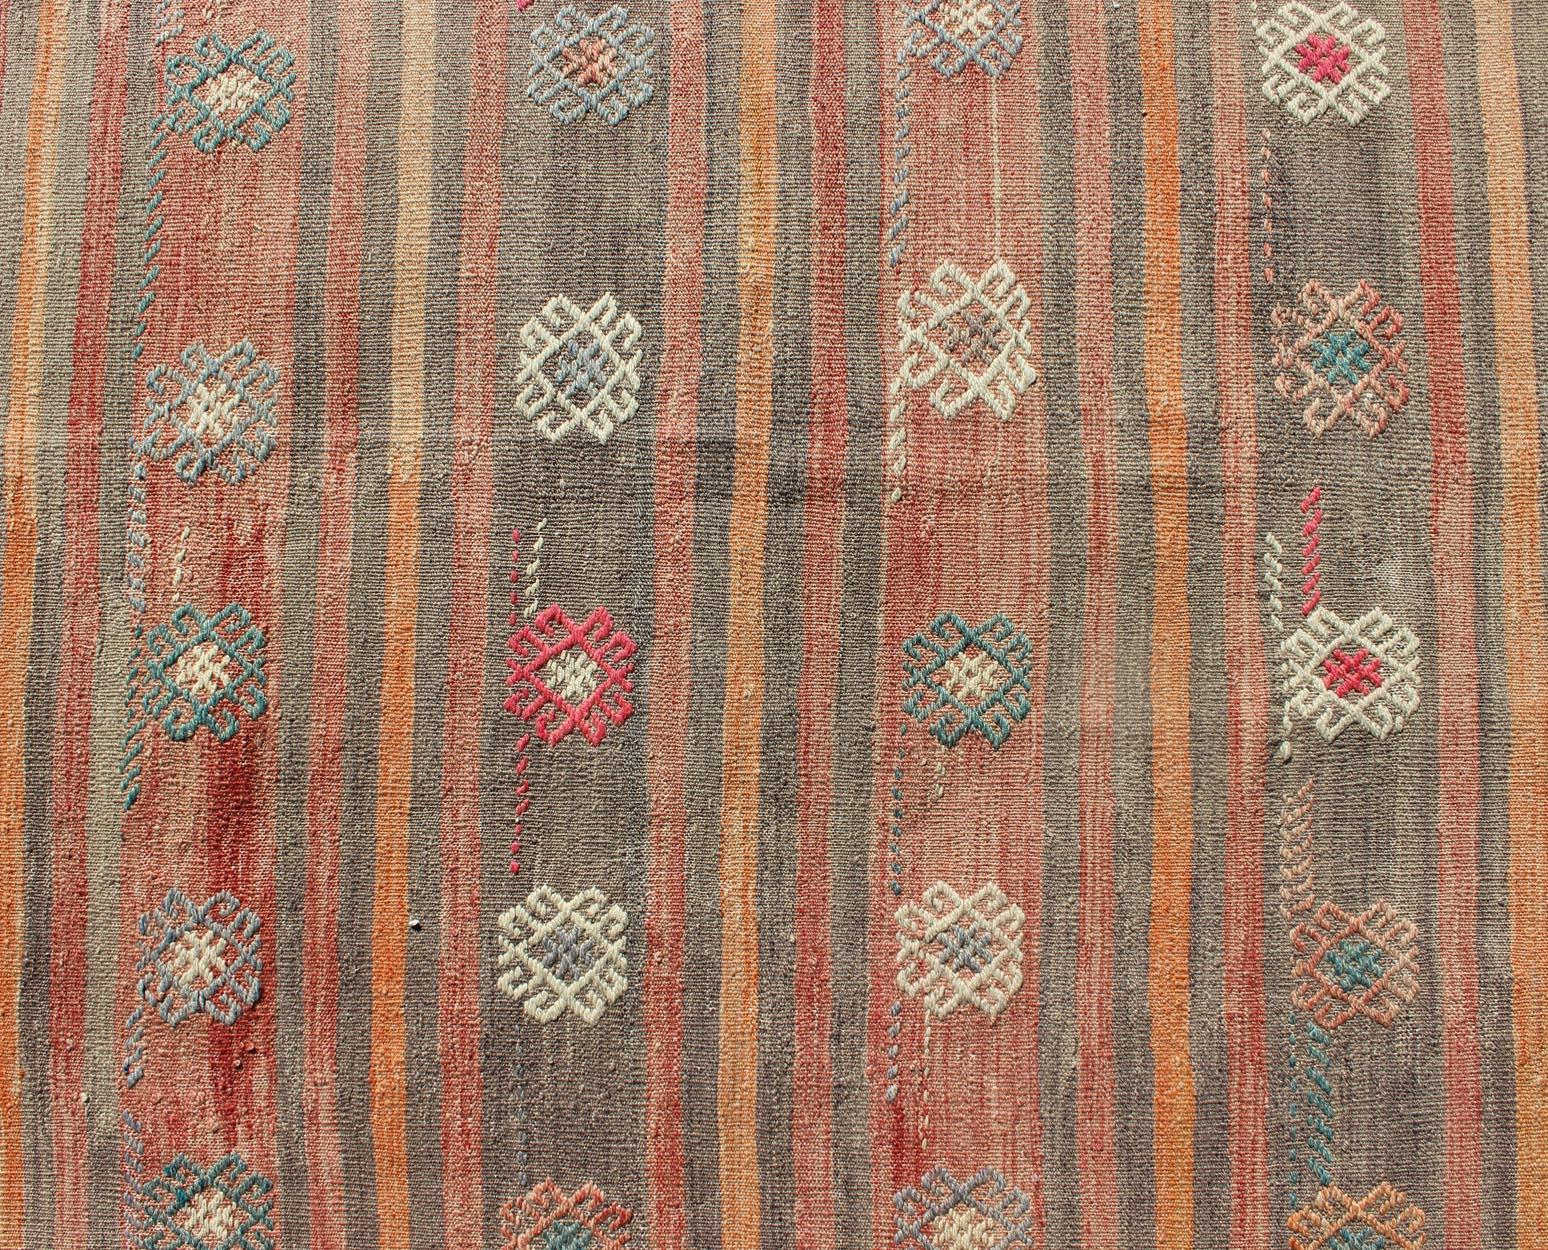 Colorful Vintage Turkish Flat-Weave Kilim Rug with Striped Geometric Design For Sale 2